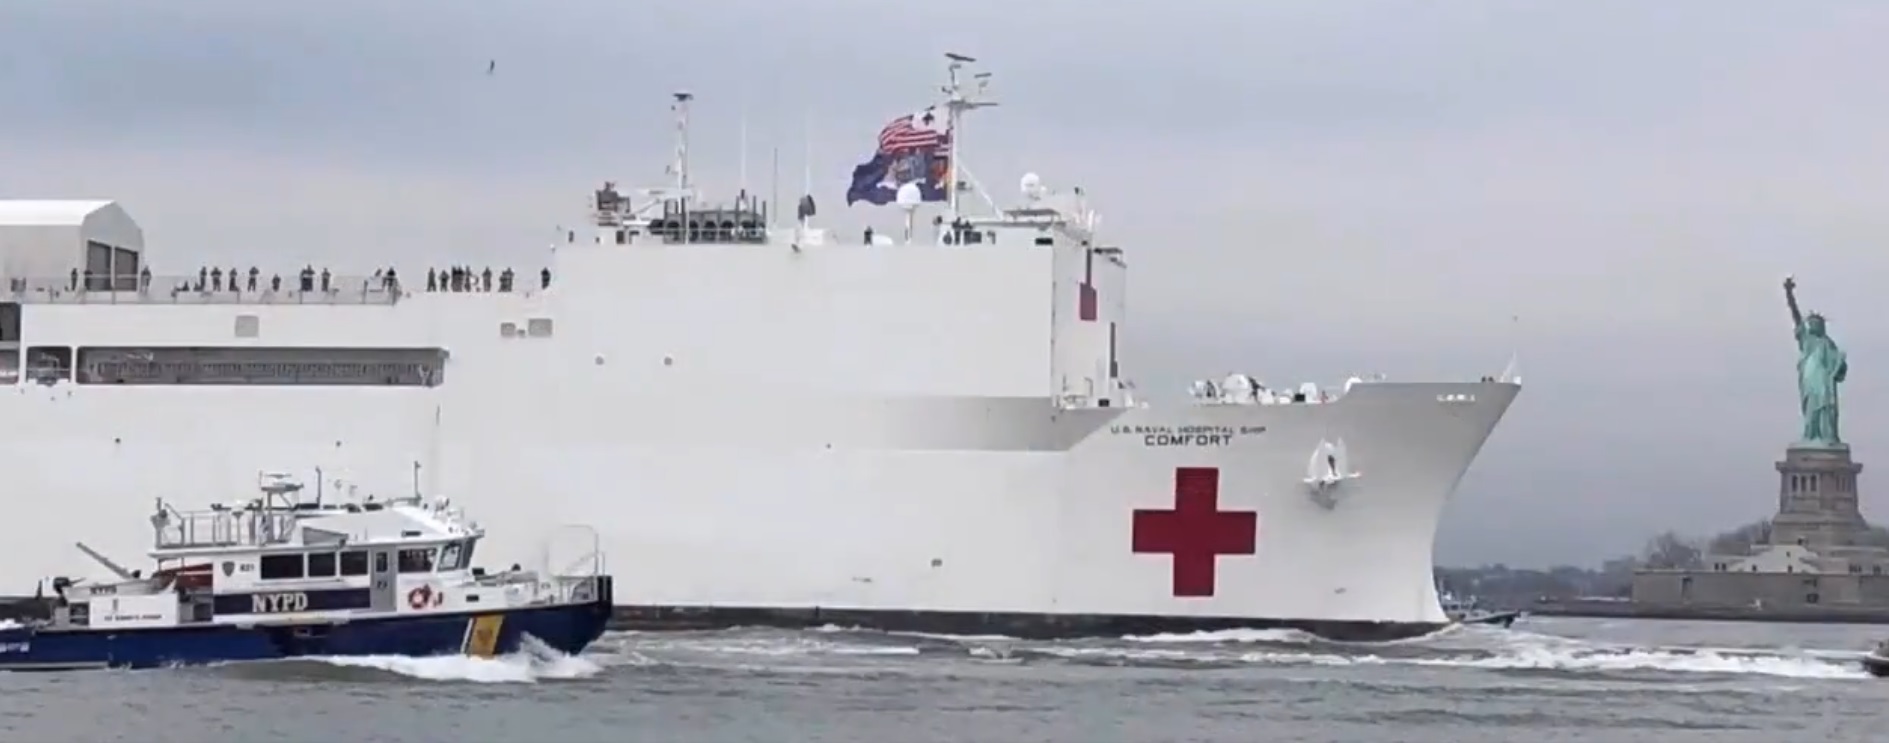 USNS Comfort Arriving in NY Harbor